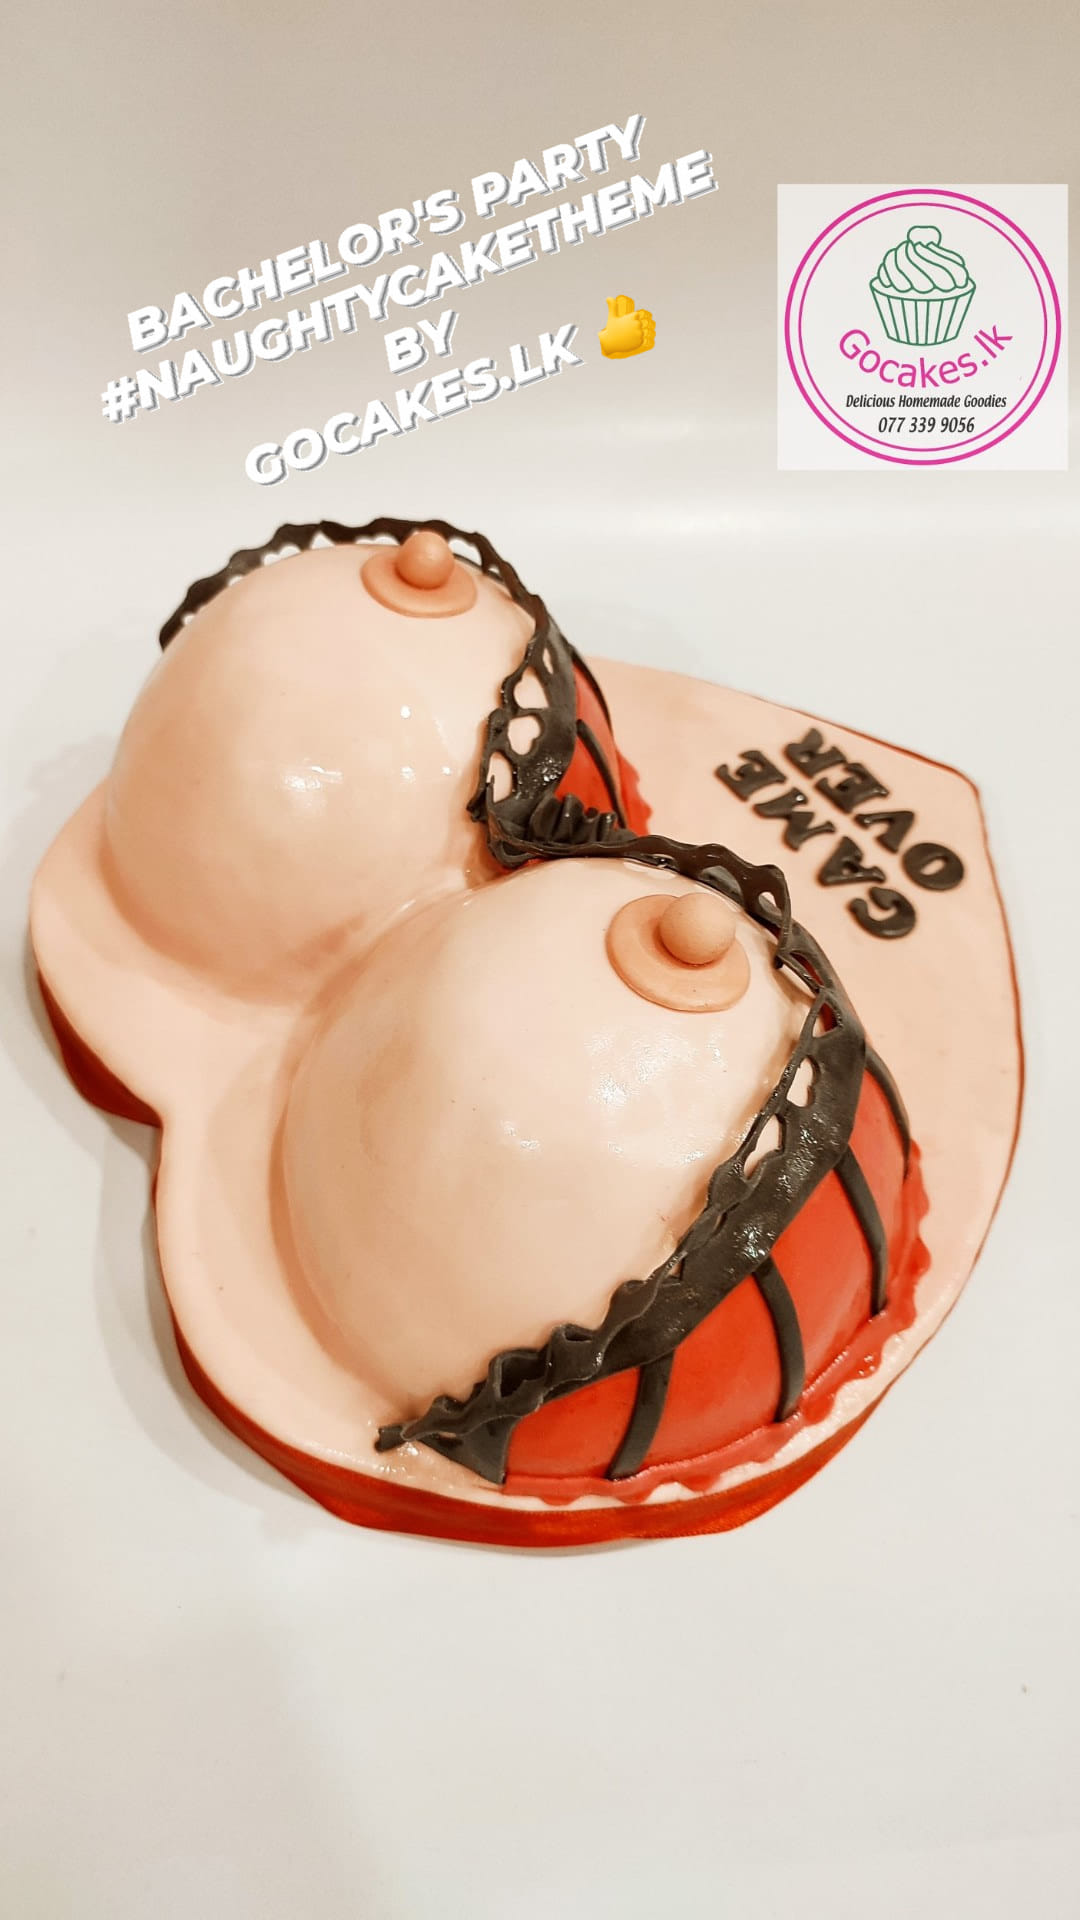 Sexy cakes for Hen parties